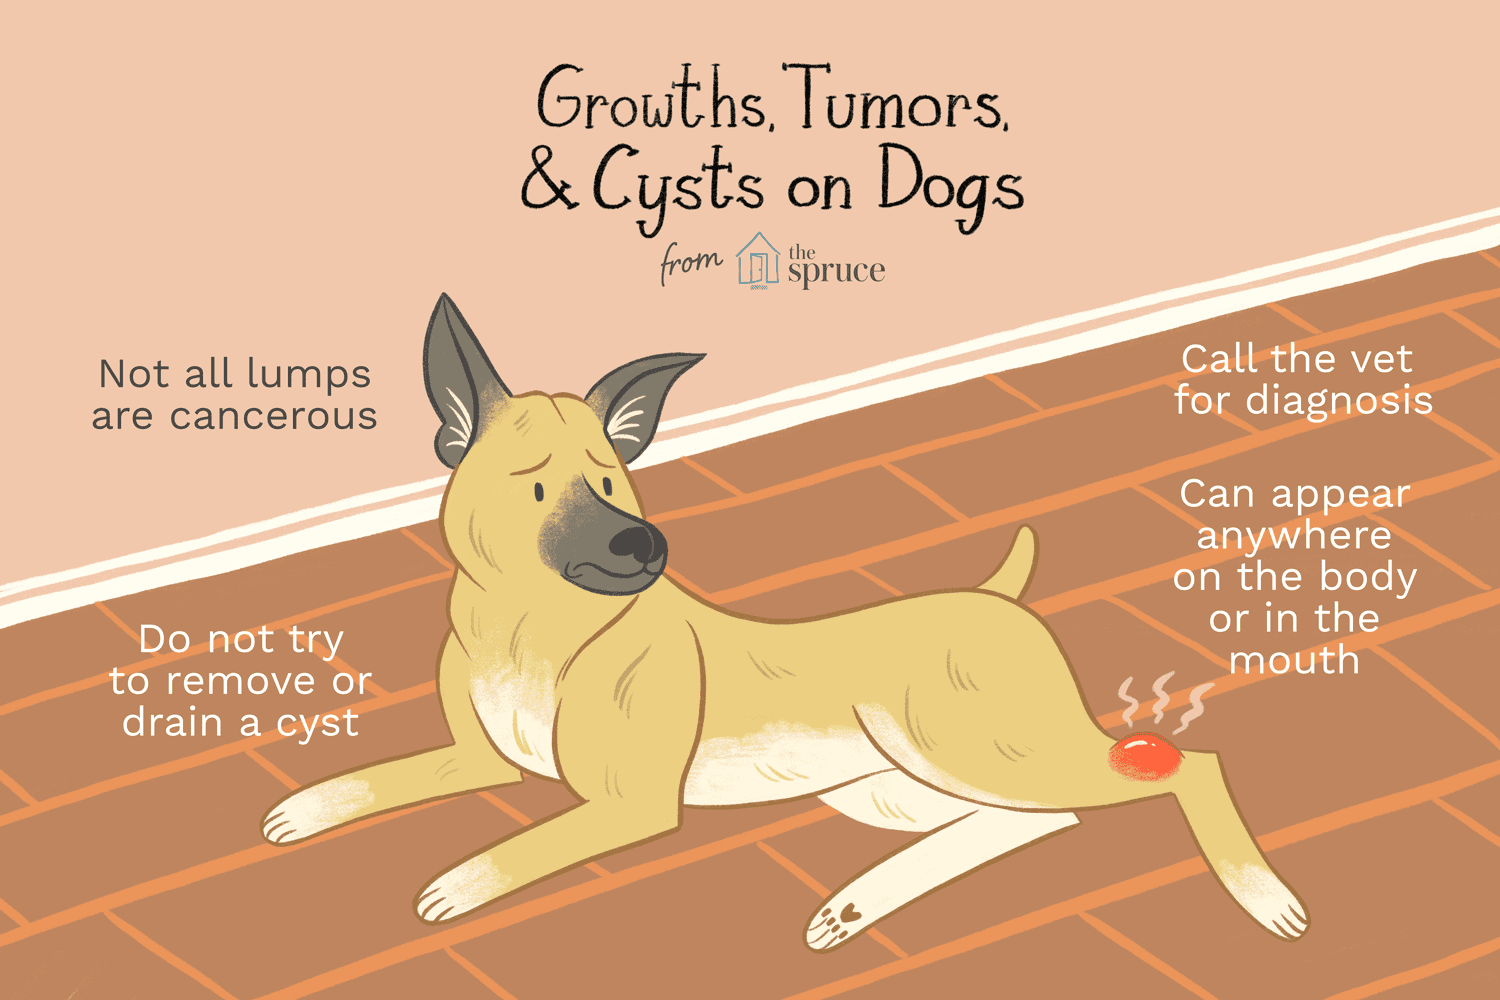 growths, tumors, and cysts on dogs illustration